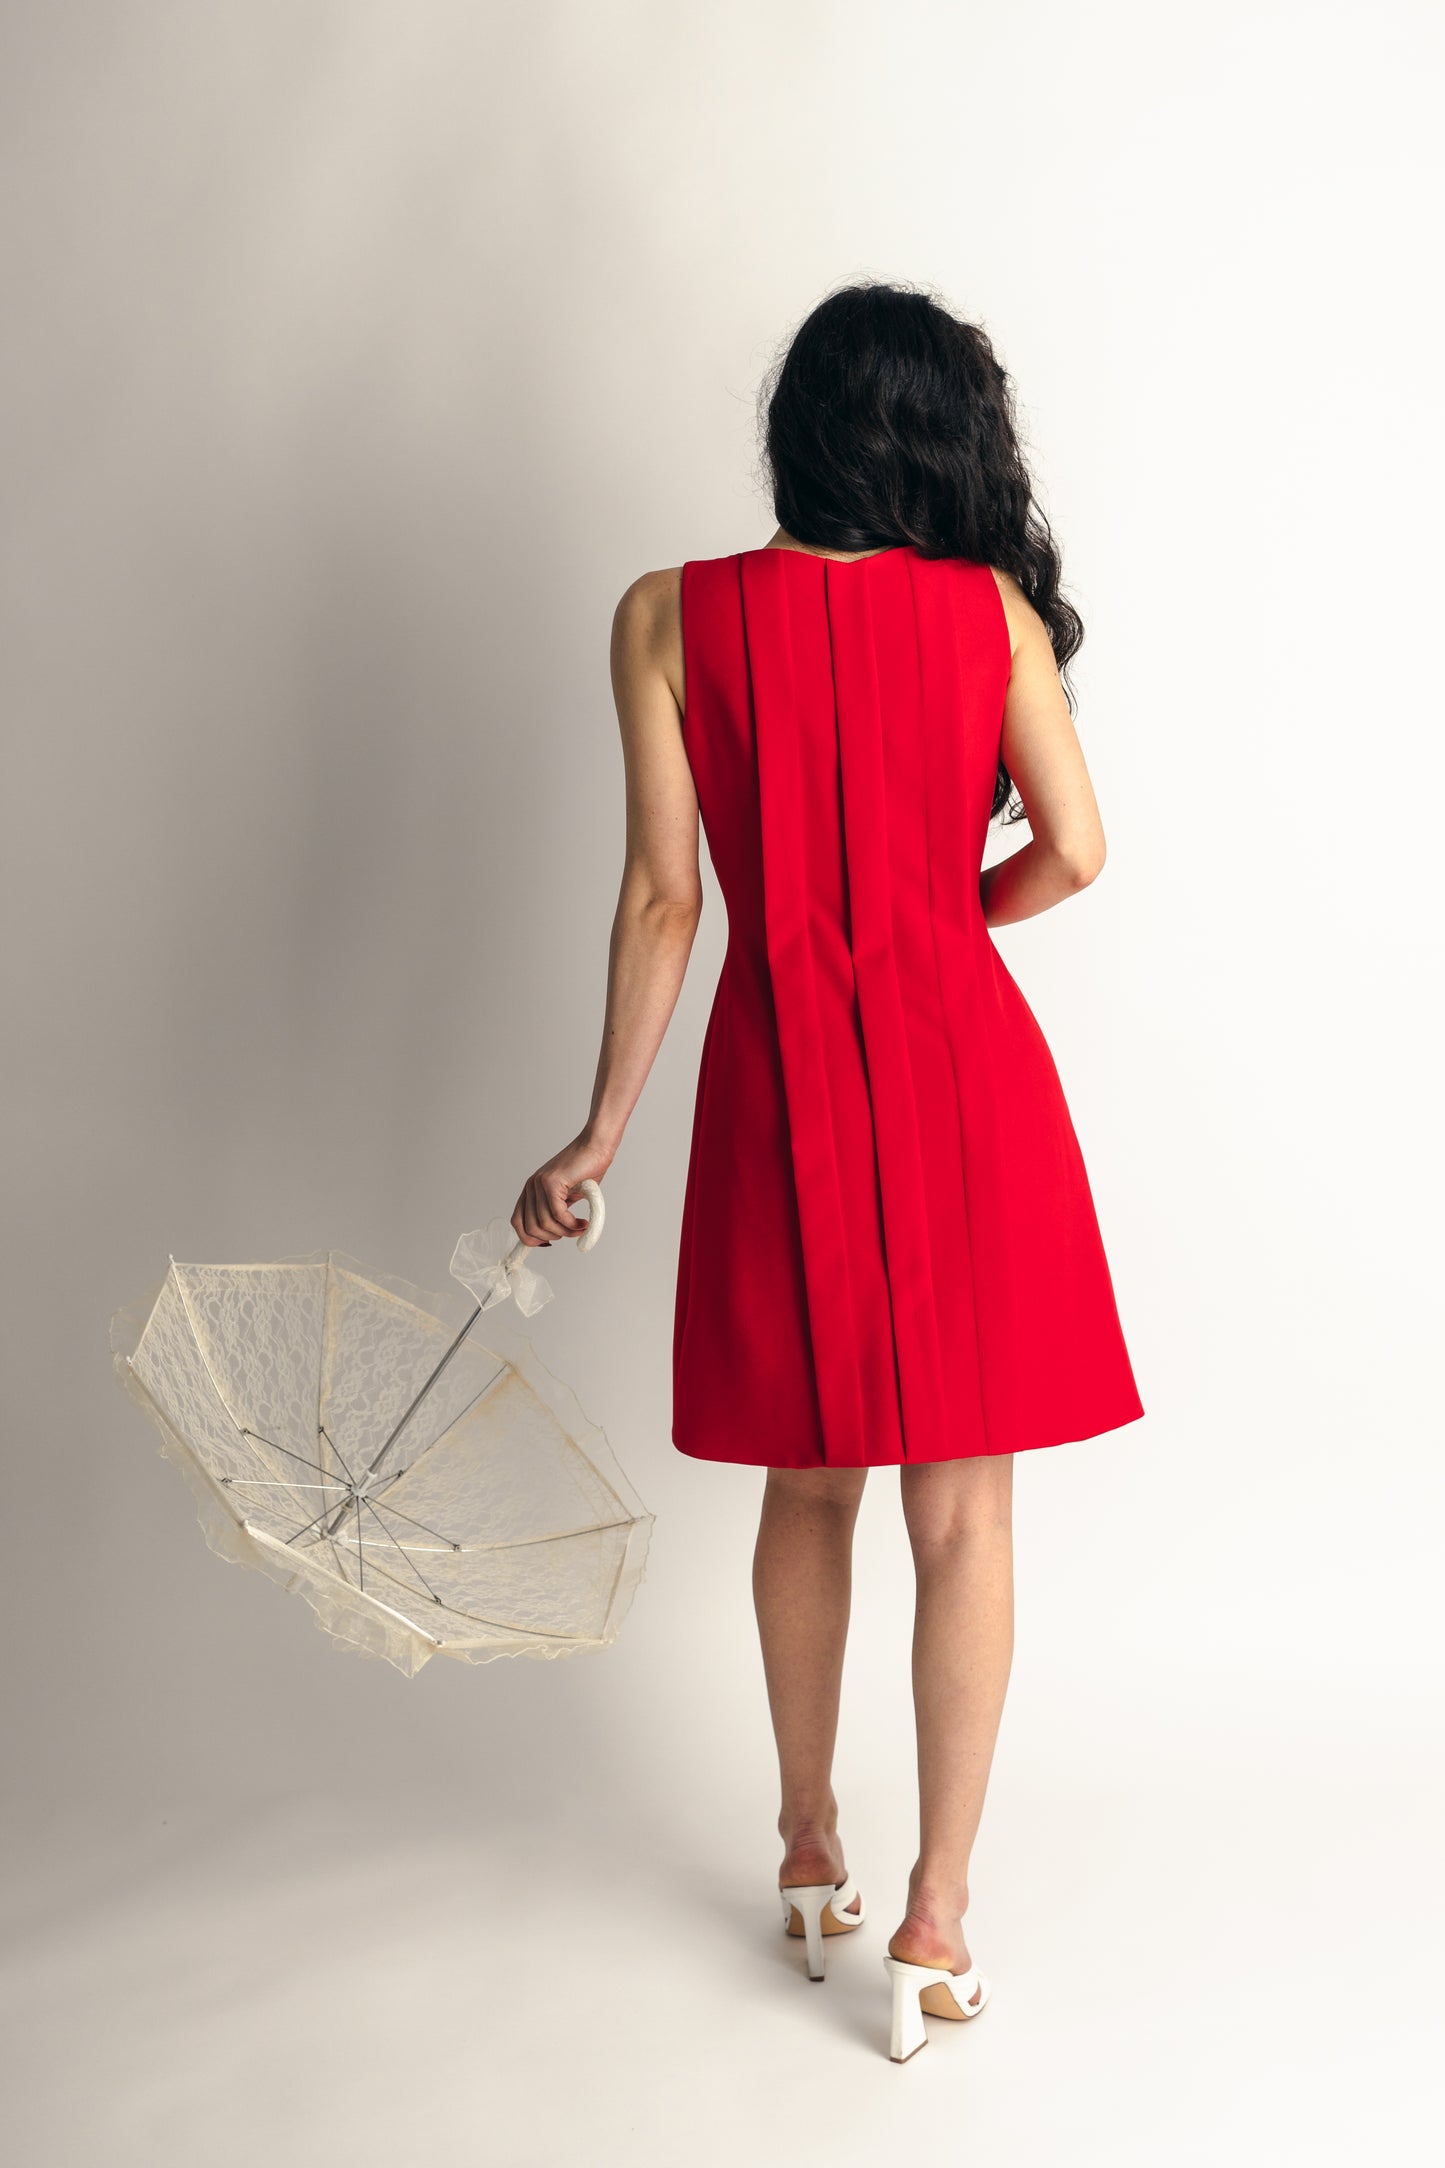 "Mon Paris" Romantic Dress Pleated Design Couture Dress In Red - back